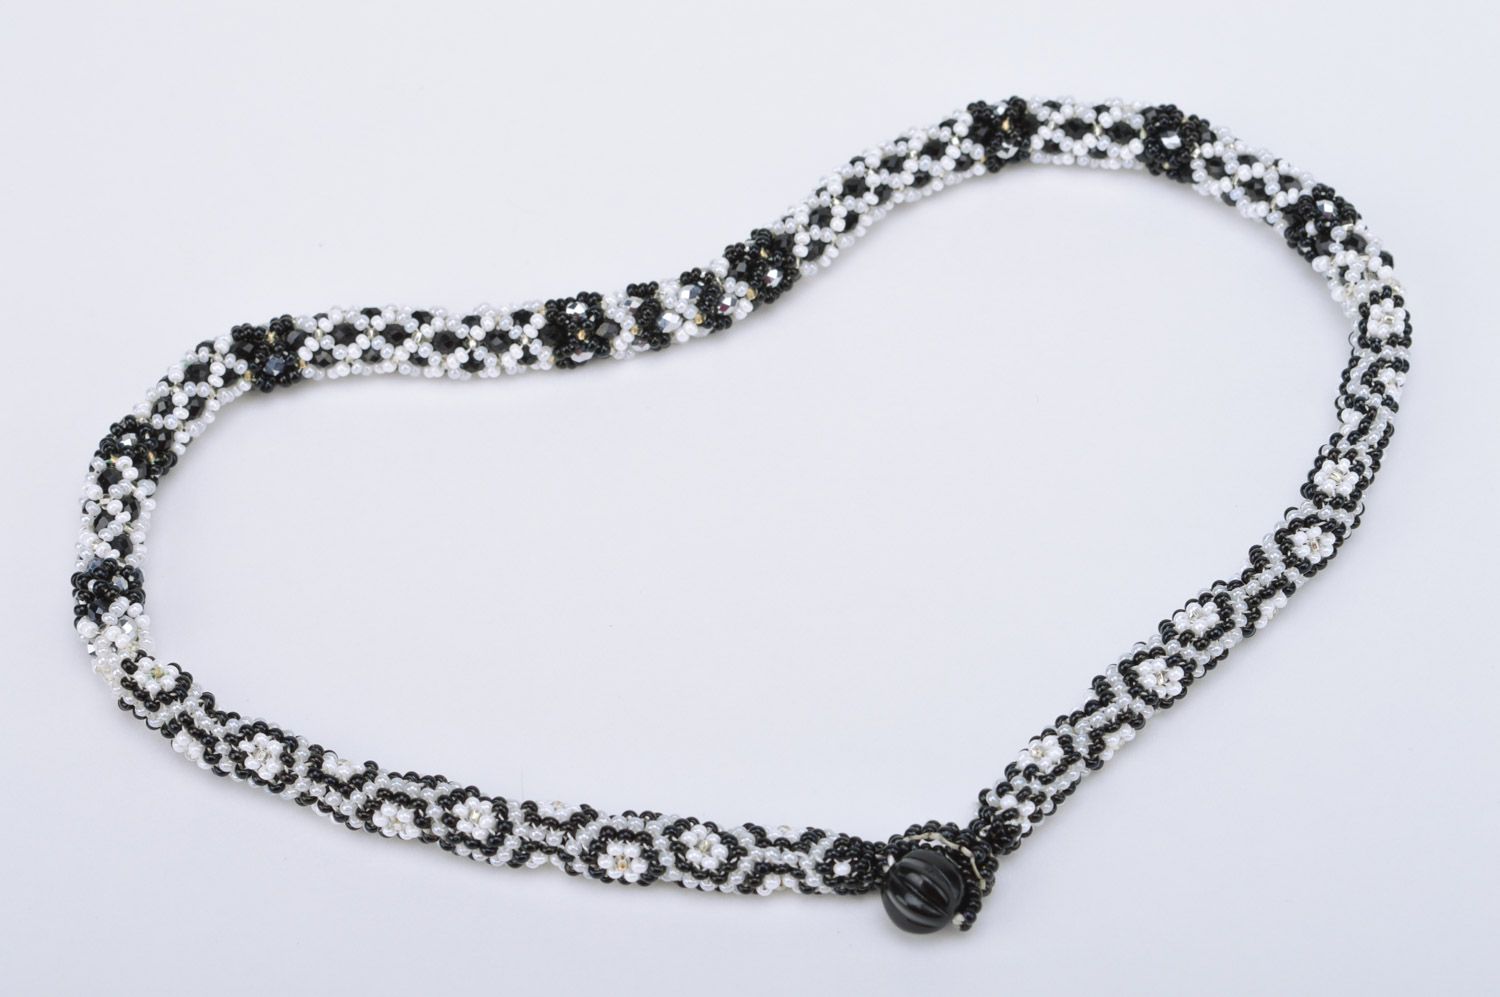 Handmade beaded black and white cord necklace for beautiful women photo 5